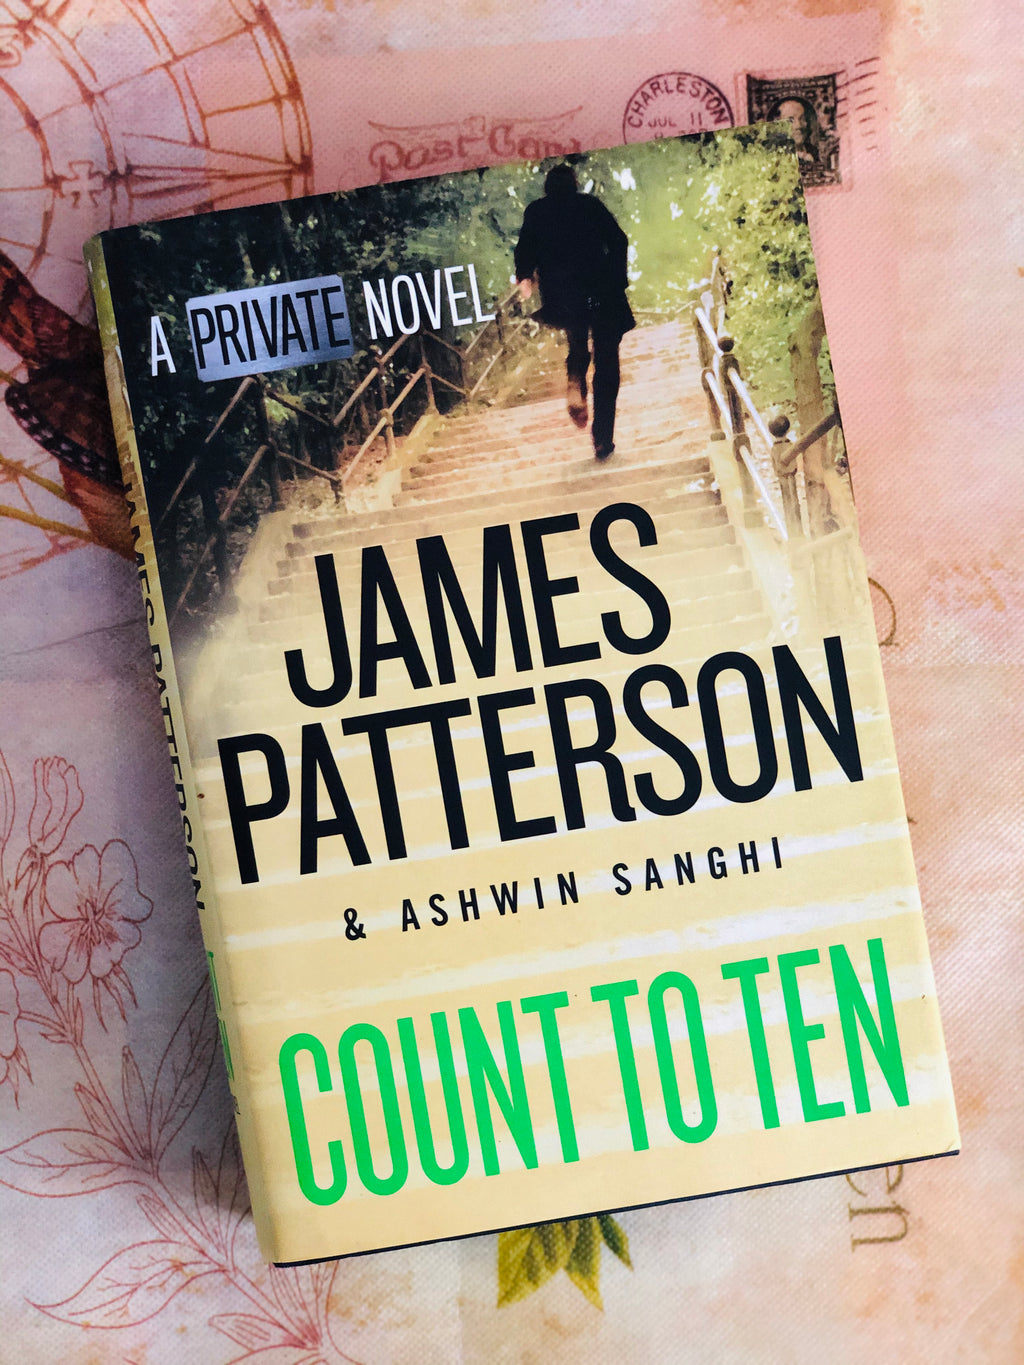 Count to Ten- By James Patterson and Ashwin Sanghi